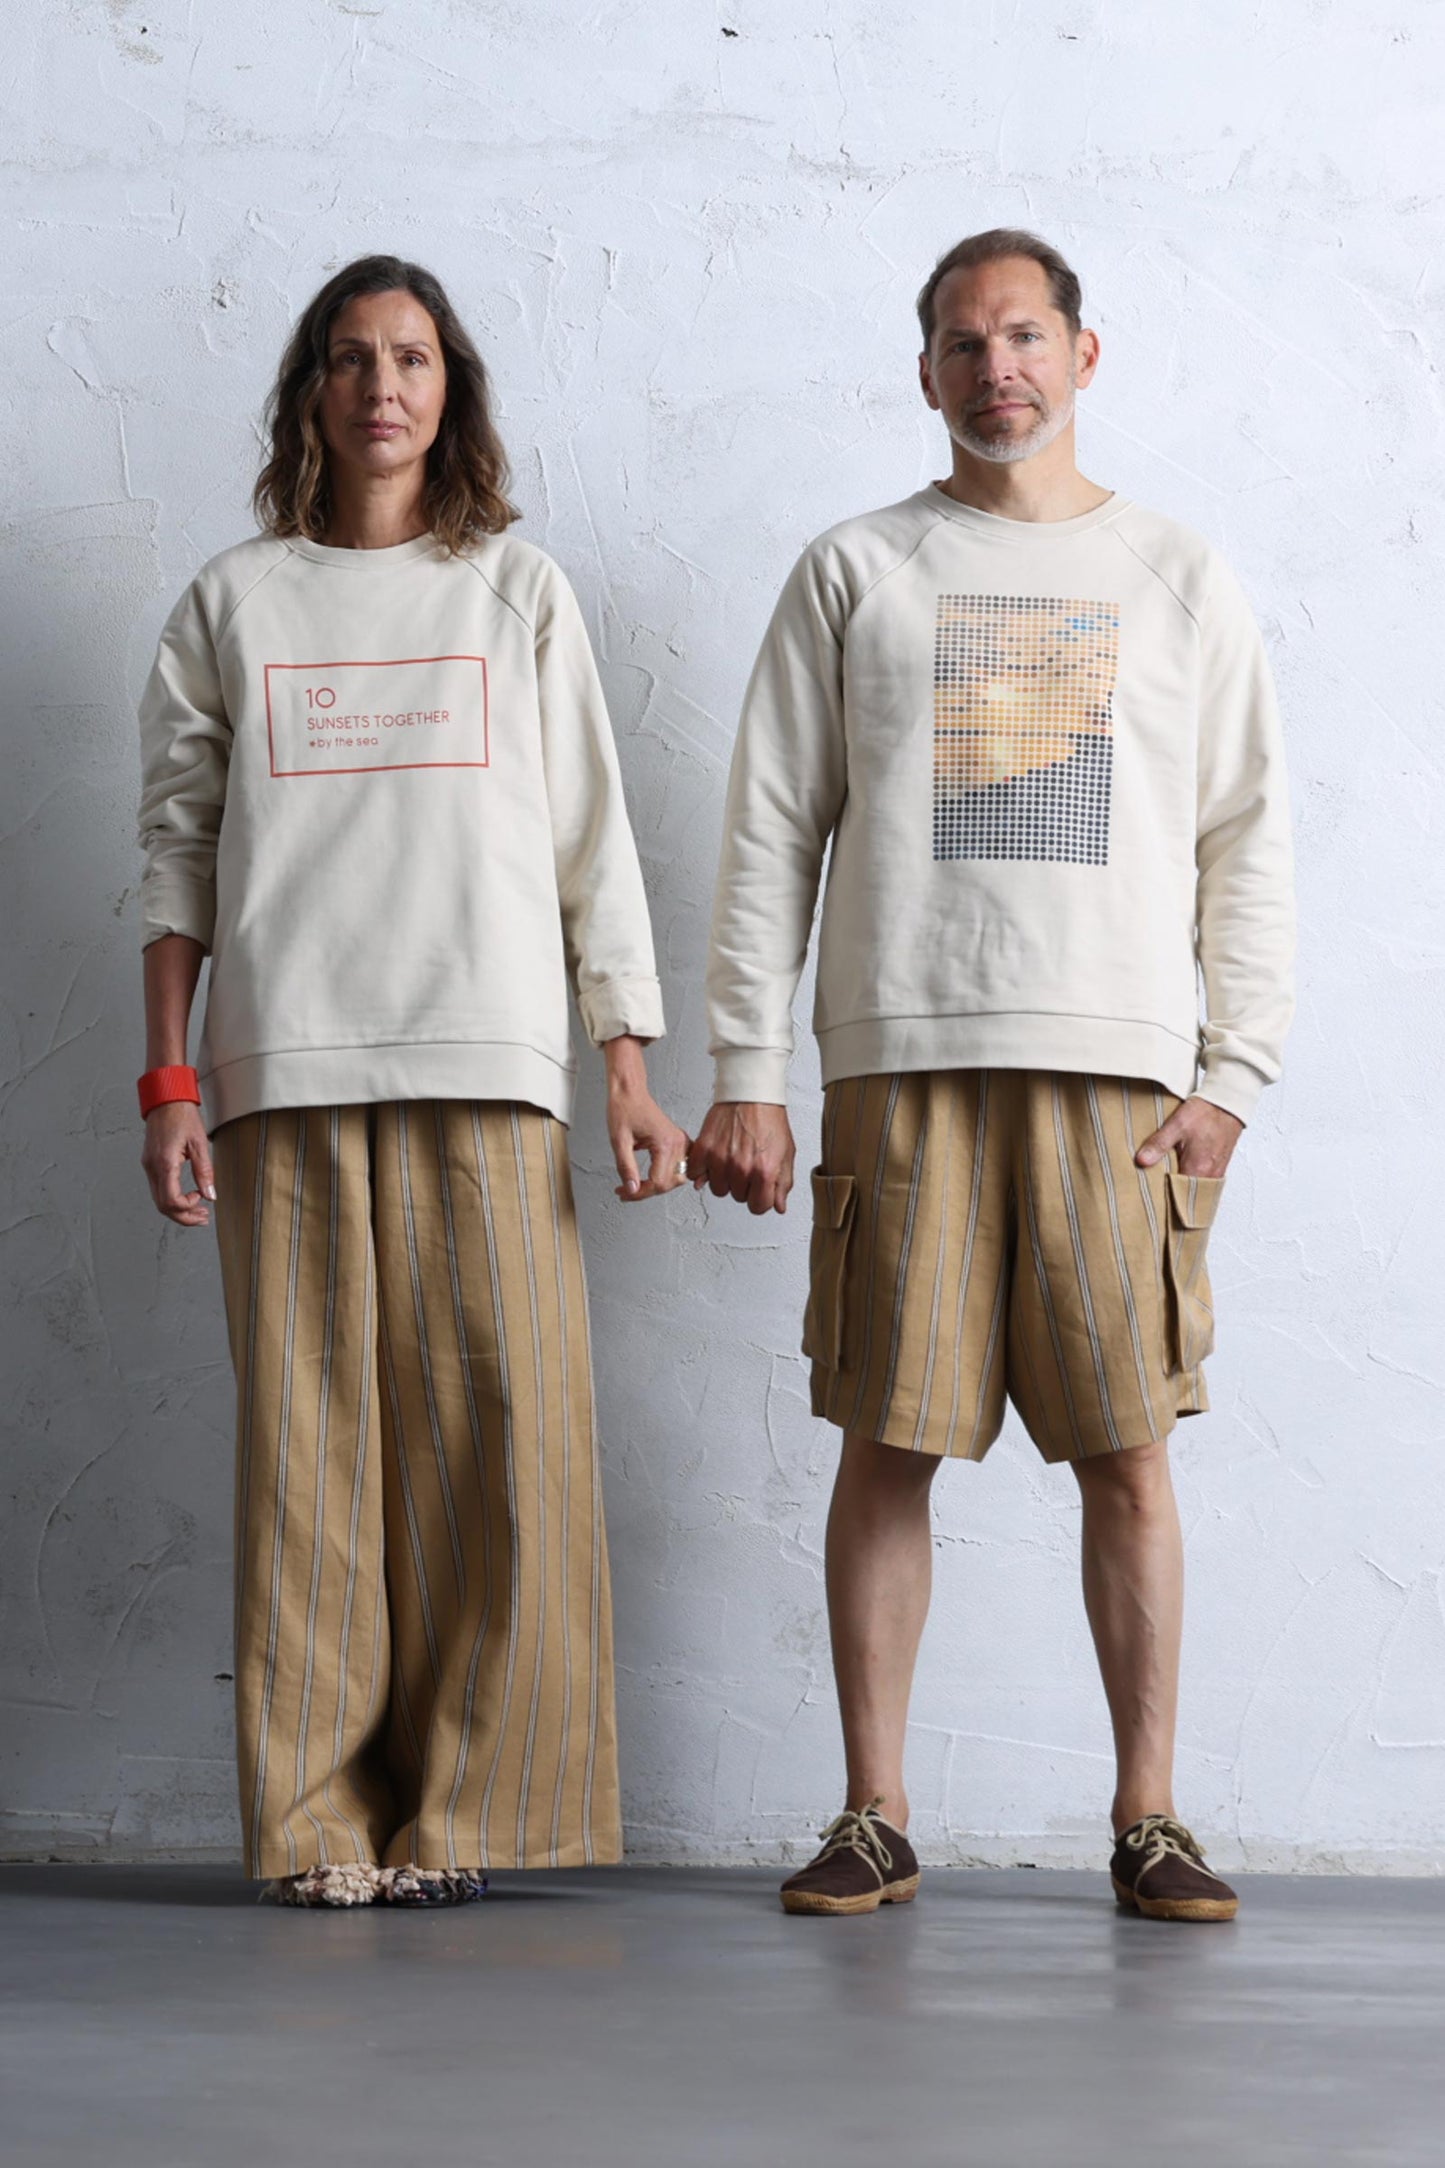 Couple wearing 10 to 10 Unisex sweatshirt with Dots print and quote representing a sunset by the sea